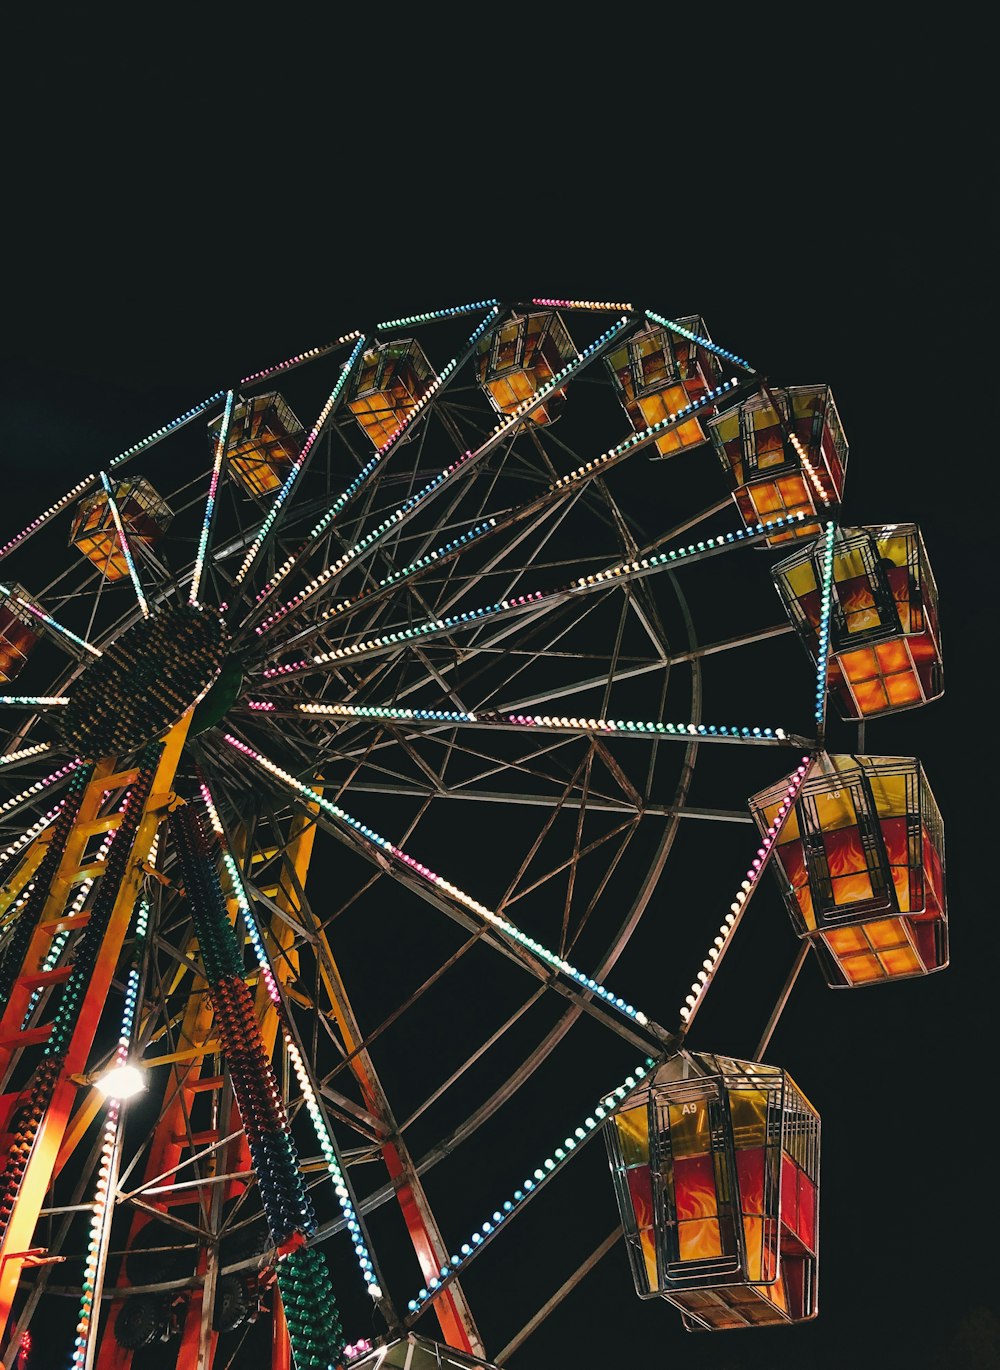 worm's eye view photography of ferris wheel during night